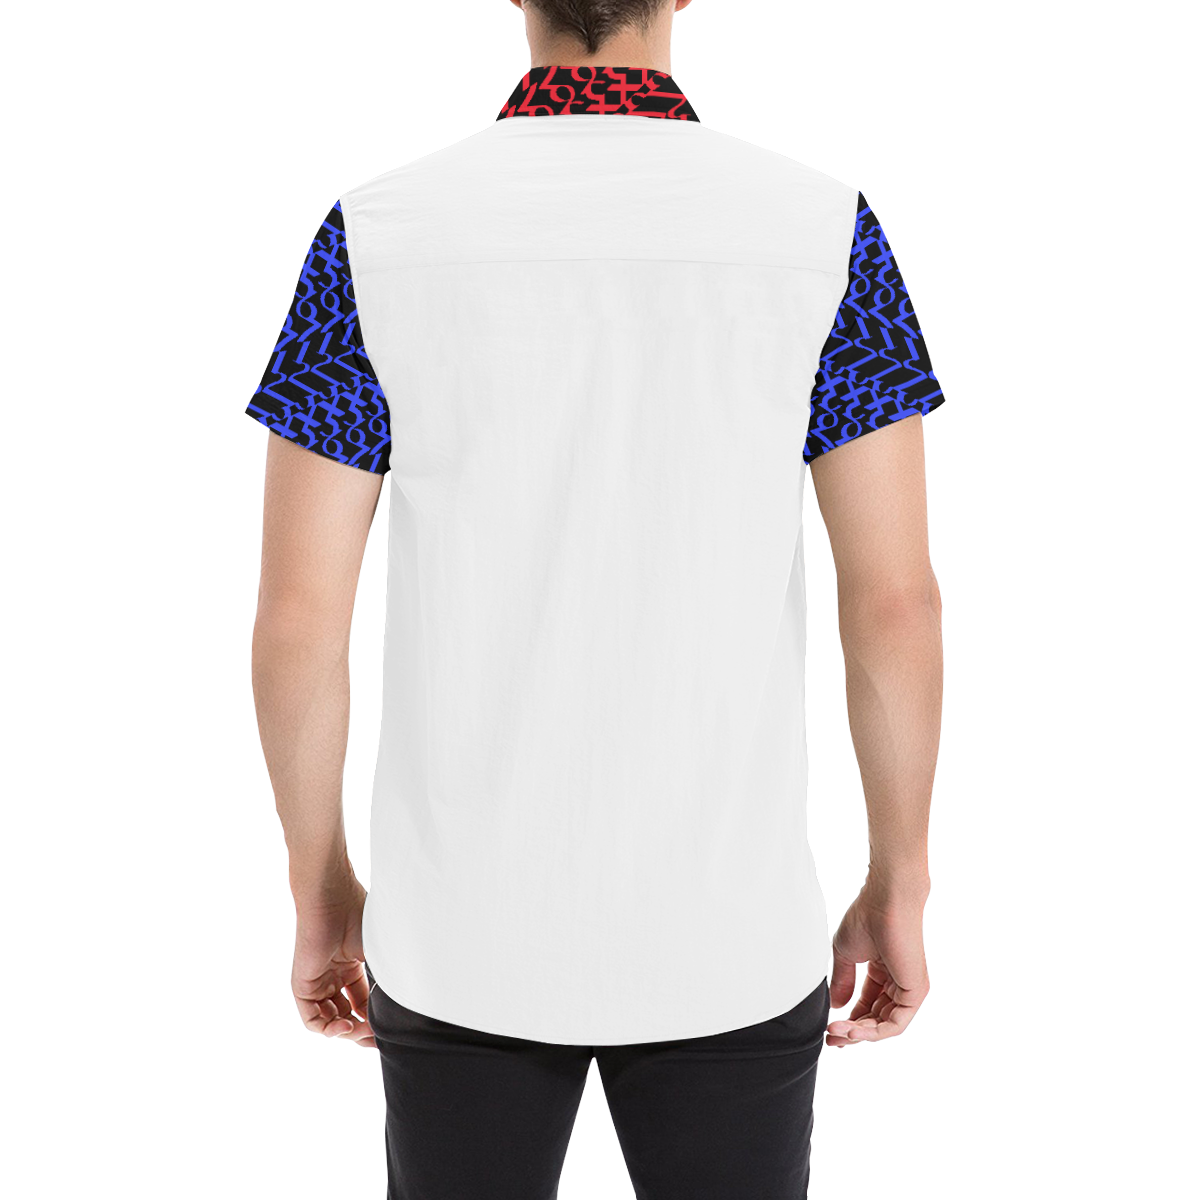 NUMBERS Collection 1234567 "Reverse" Split collar/sleeves Men's All Over Print Short Sleeve Shirt (Model T53)